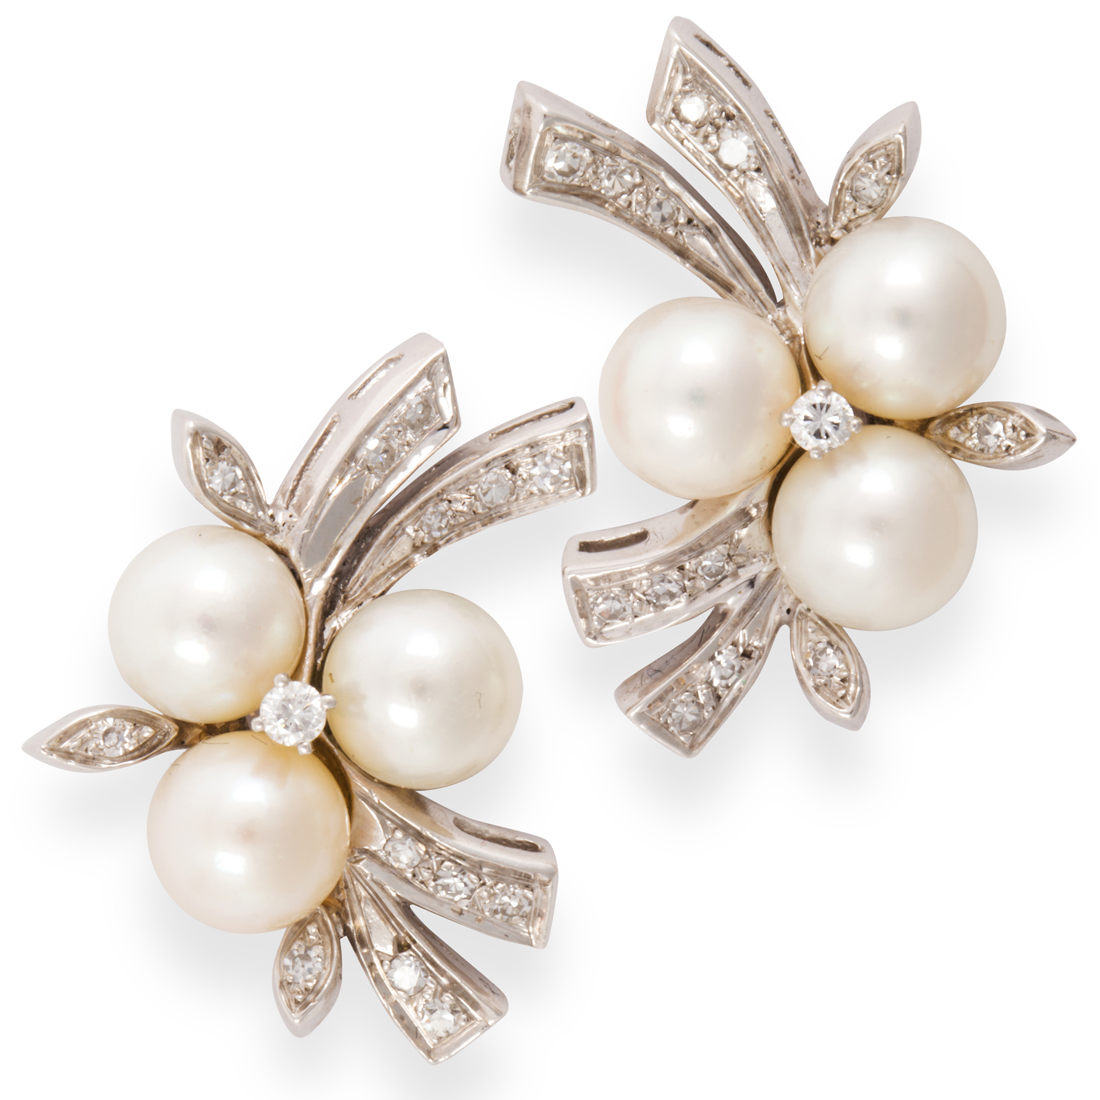 A PAIR OF CULTURED PEARL, DIAMOND